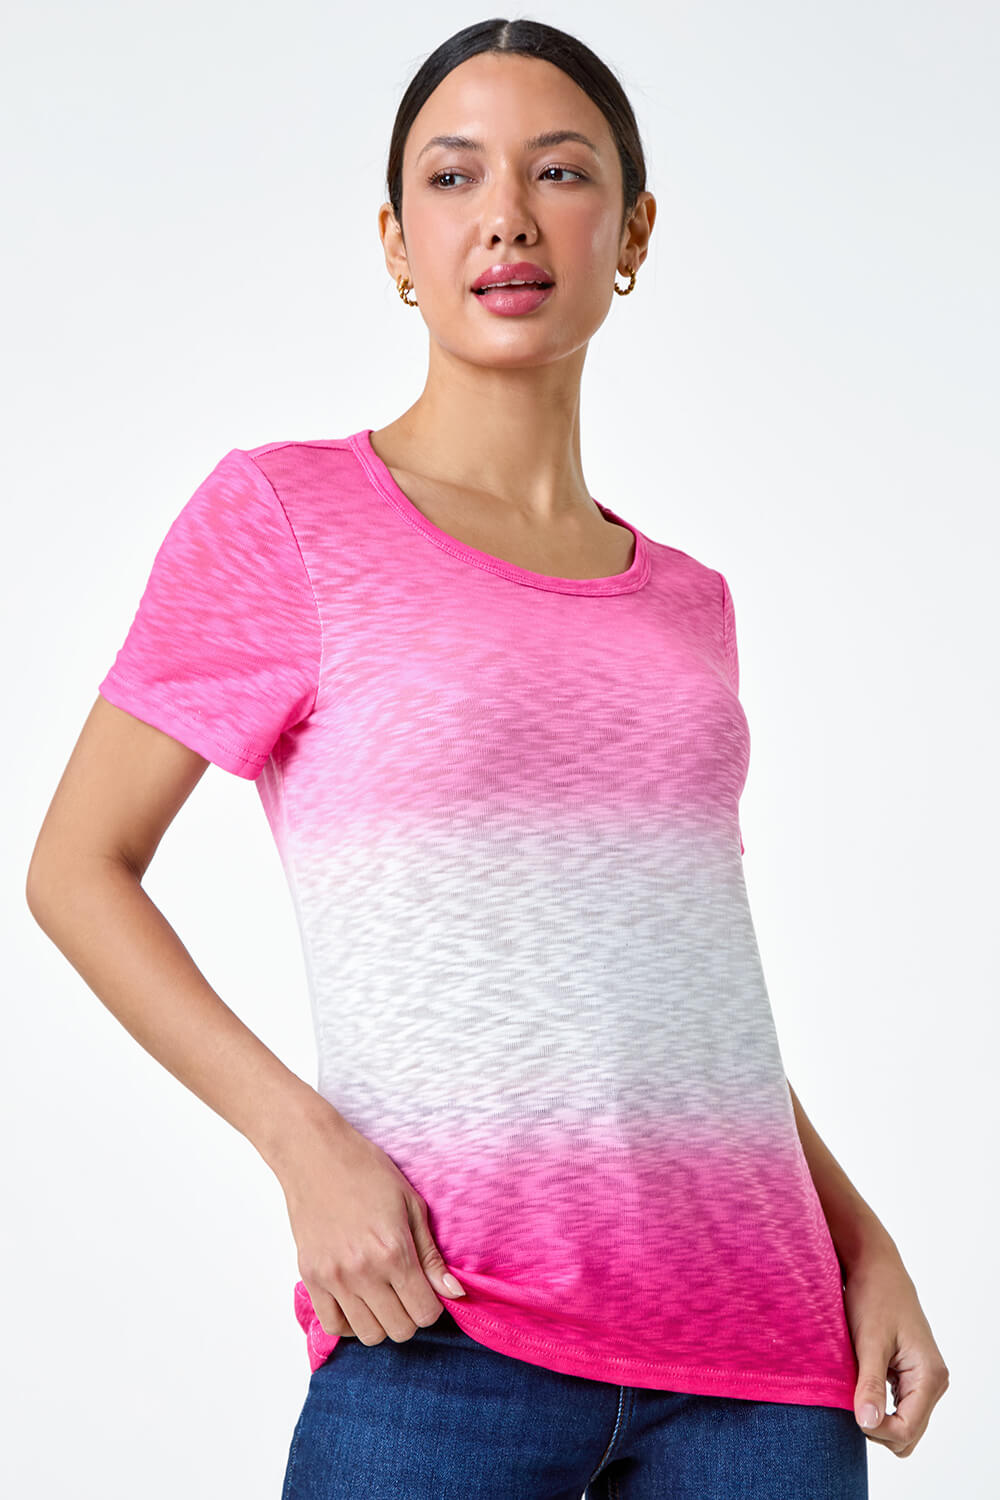 PINK Ombre Burnout Print Stretch Jersey T-Shirt, Image 2 of 5